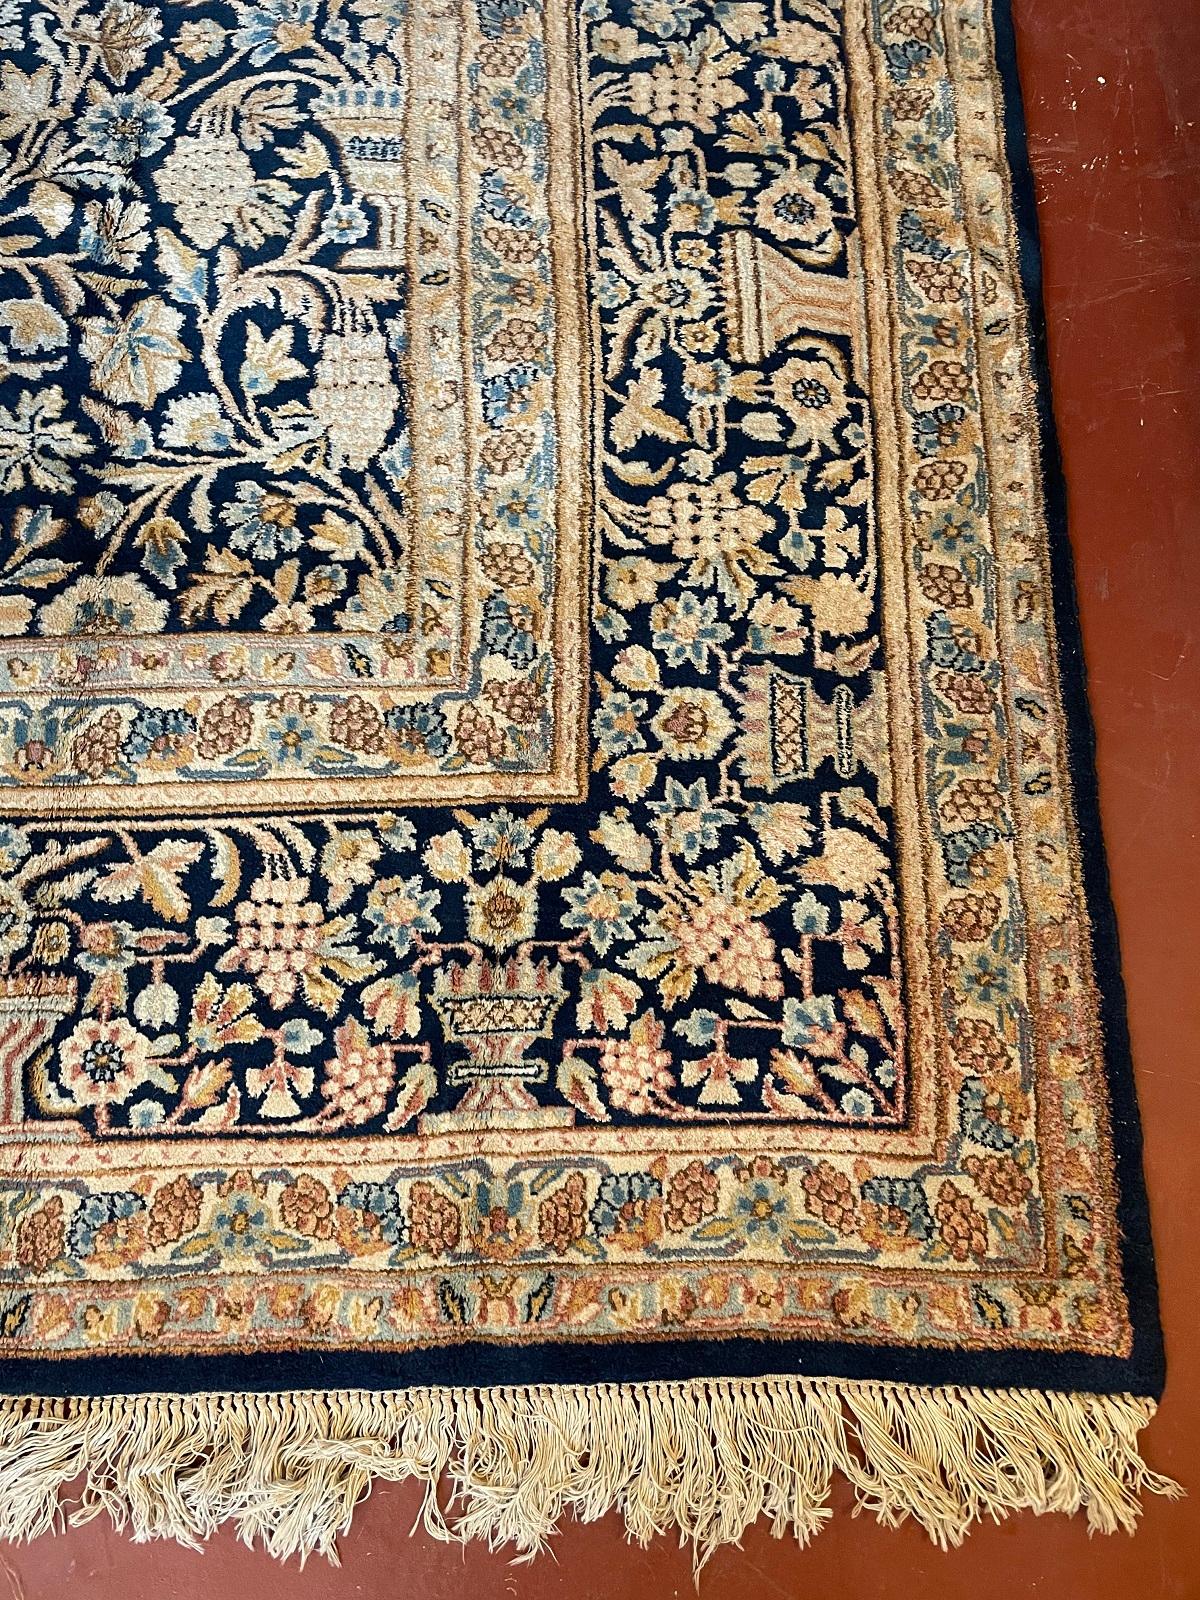 Superb hand-knotted Persian rug in blue colors -20th century. Measure: 302cm-378cm.

 